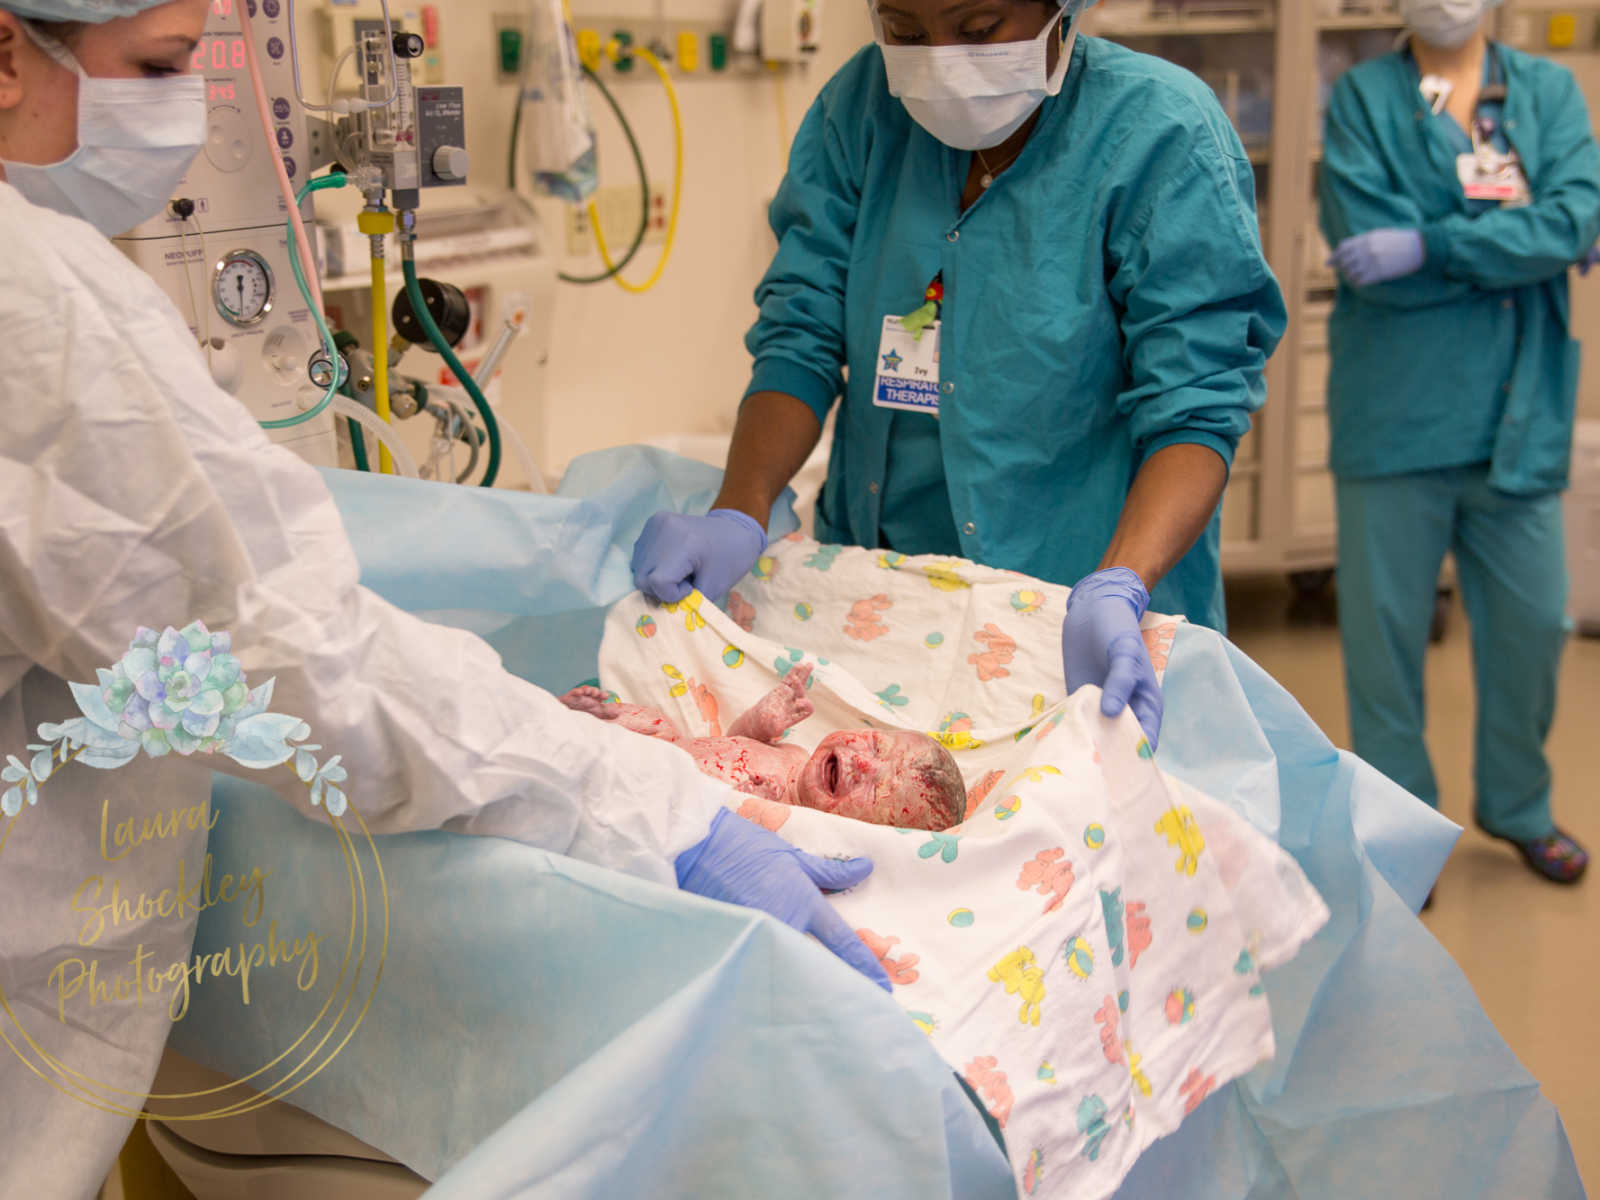 Doctors wrap newborn baby in blanket after c-section